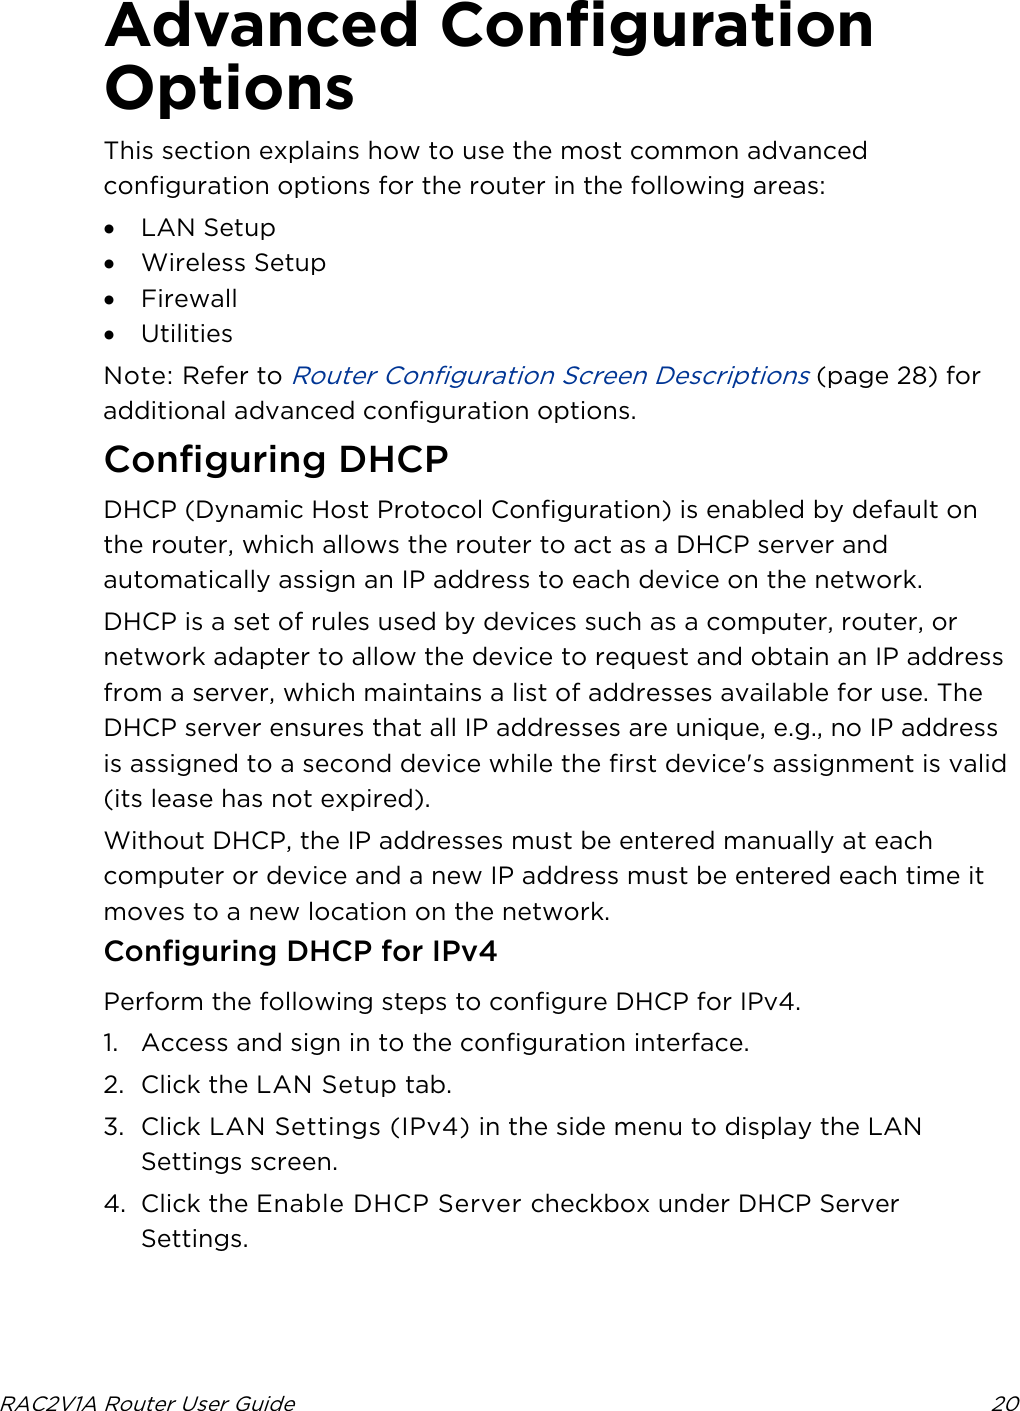  RAC2V1A Router User Guide 20  Advanced Configuration Options This section explains how to use the most common advanced configuration options for the router in the following areas: • LAN Setup • Wireless Setup • Firewall • Utilities Note: Refer to Router Configuration Screen Descriptions (page 28) for additional advanced configuration options.   Configuring DHCP DHCP (Dynamic Host Protocol Configuration) is enabled by default on the router, which allows the router to act as a DHCP server and automatically assign an IP address to each device on the network. DHCP is a set of rules used by devices such as a computer, router, or network adapter to allow the device to request and obtain an IP address from a server, which maintains a list of addresses available for use. The DHCP server ensures that all IP addresses are unique, e.g., no IP address is assigned to a second device while the first device&apos;s assignment is valid (its lease has not expired). Without DHCP, the IP addresses must be entered manually at each computer or device and a new IP address must be entered each time it moves to a new location on the network. Configuring DHCP for IPv4 Perform the following steps to configure DHCP for IPv4. 1. Access and sign in to the configuration interface. 2. Click the LAN Setup tab. 3. Click LAN Settings (IPv4) in the side menu to display the LAN Settings screen. 4. Click the Enable DHCP Server checkbox under DHCP Server Settings. 